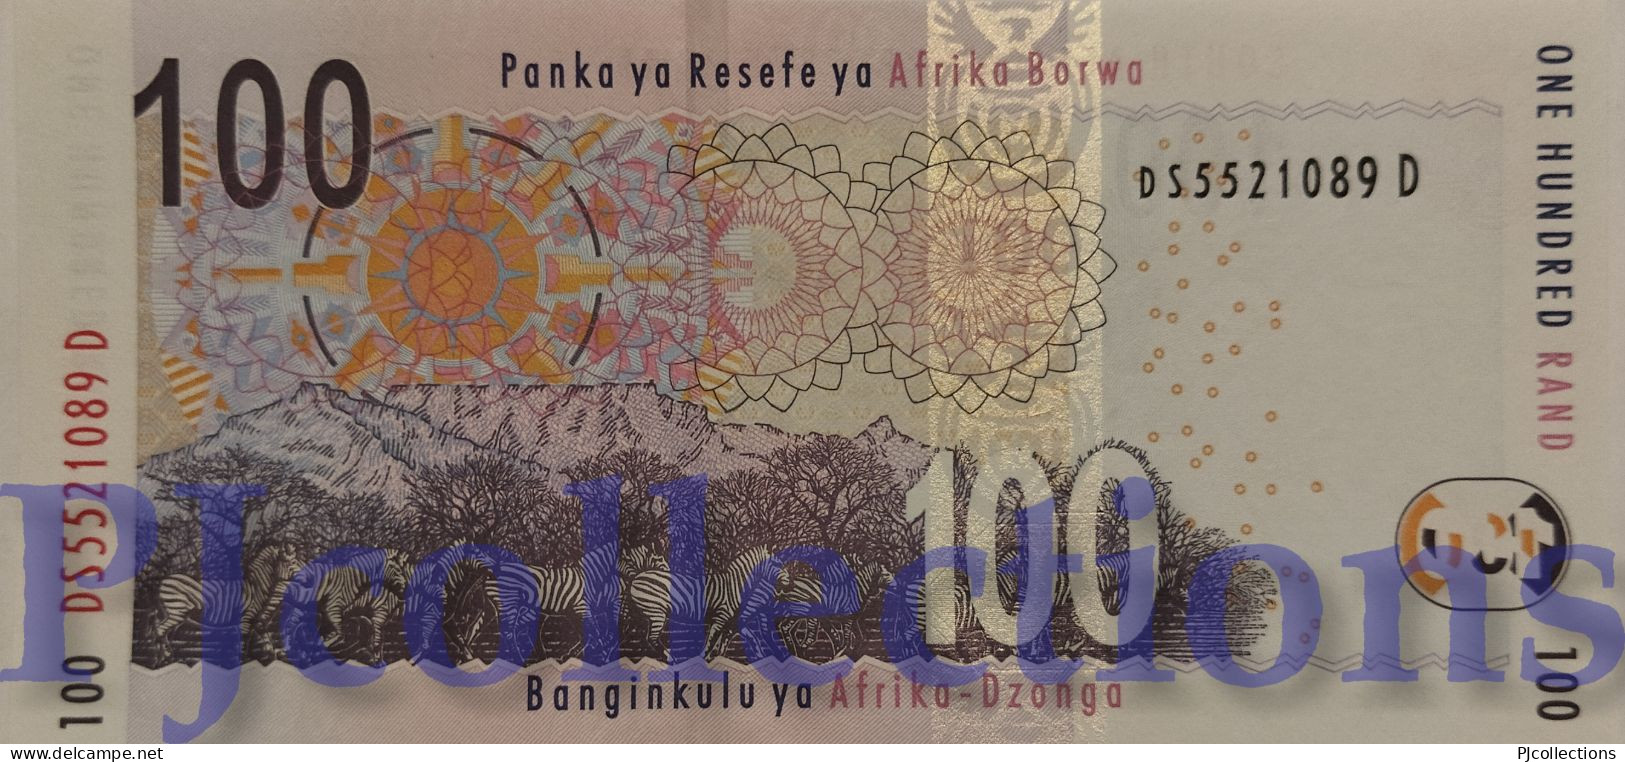 SOUTH AFRICA 100 RAND 2005 PICK 131b UNC - South Africa